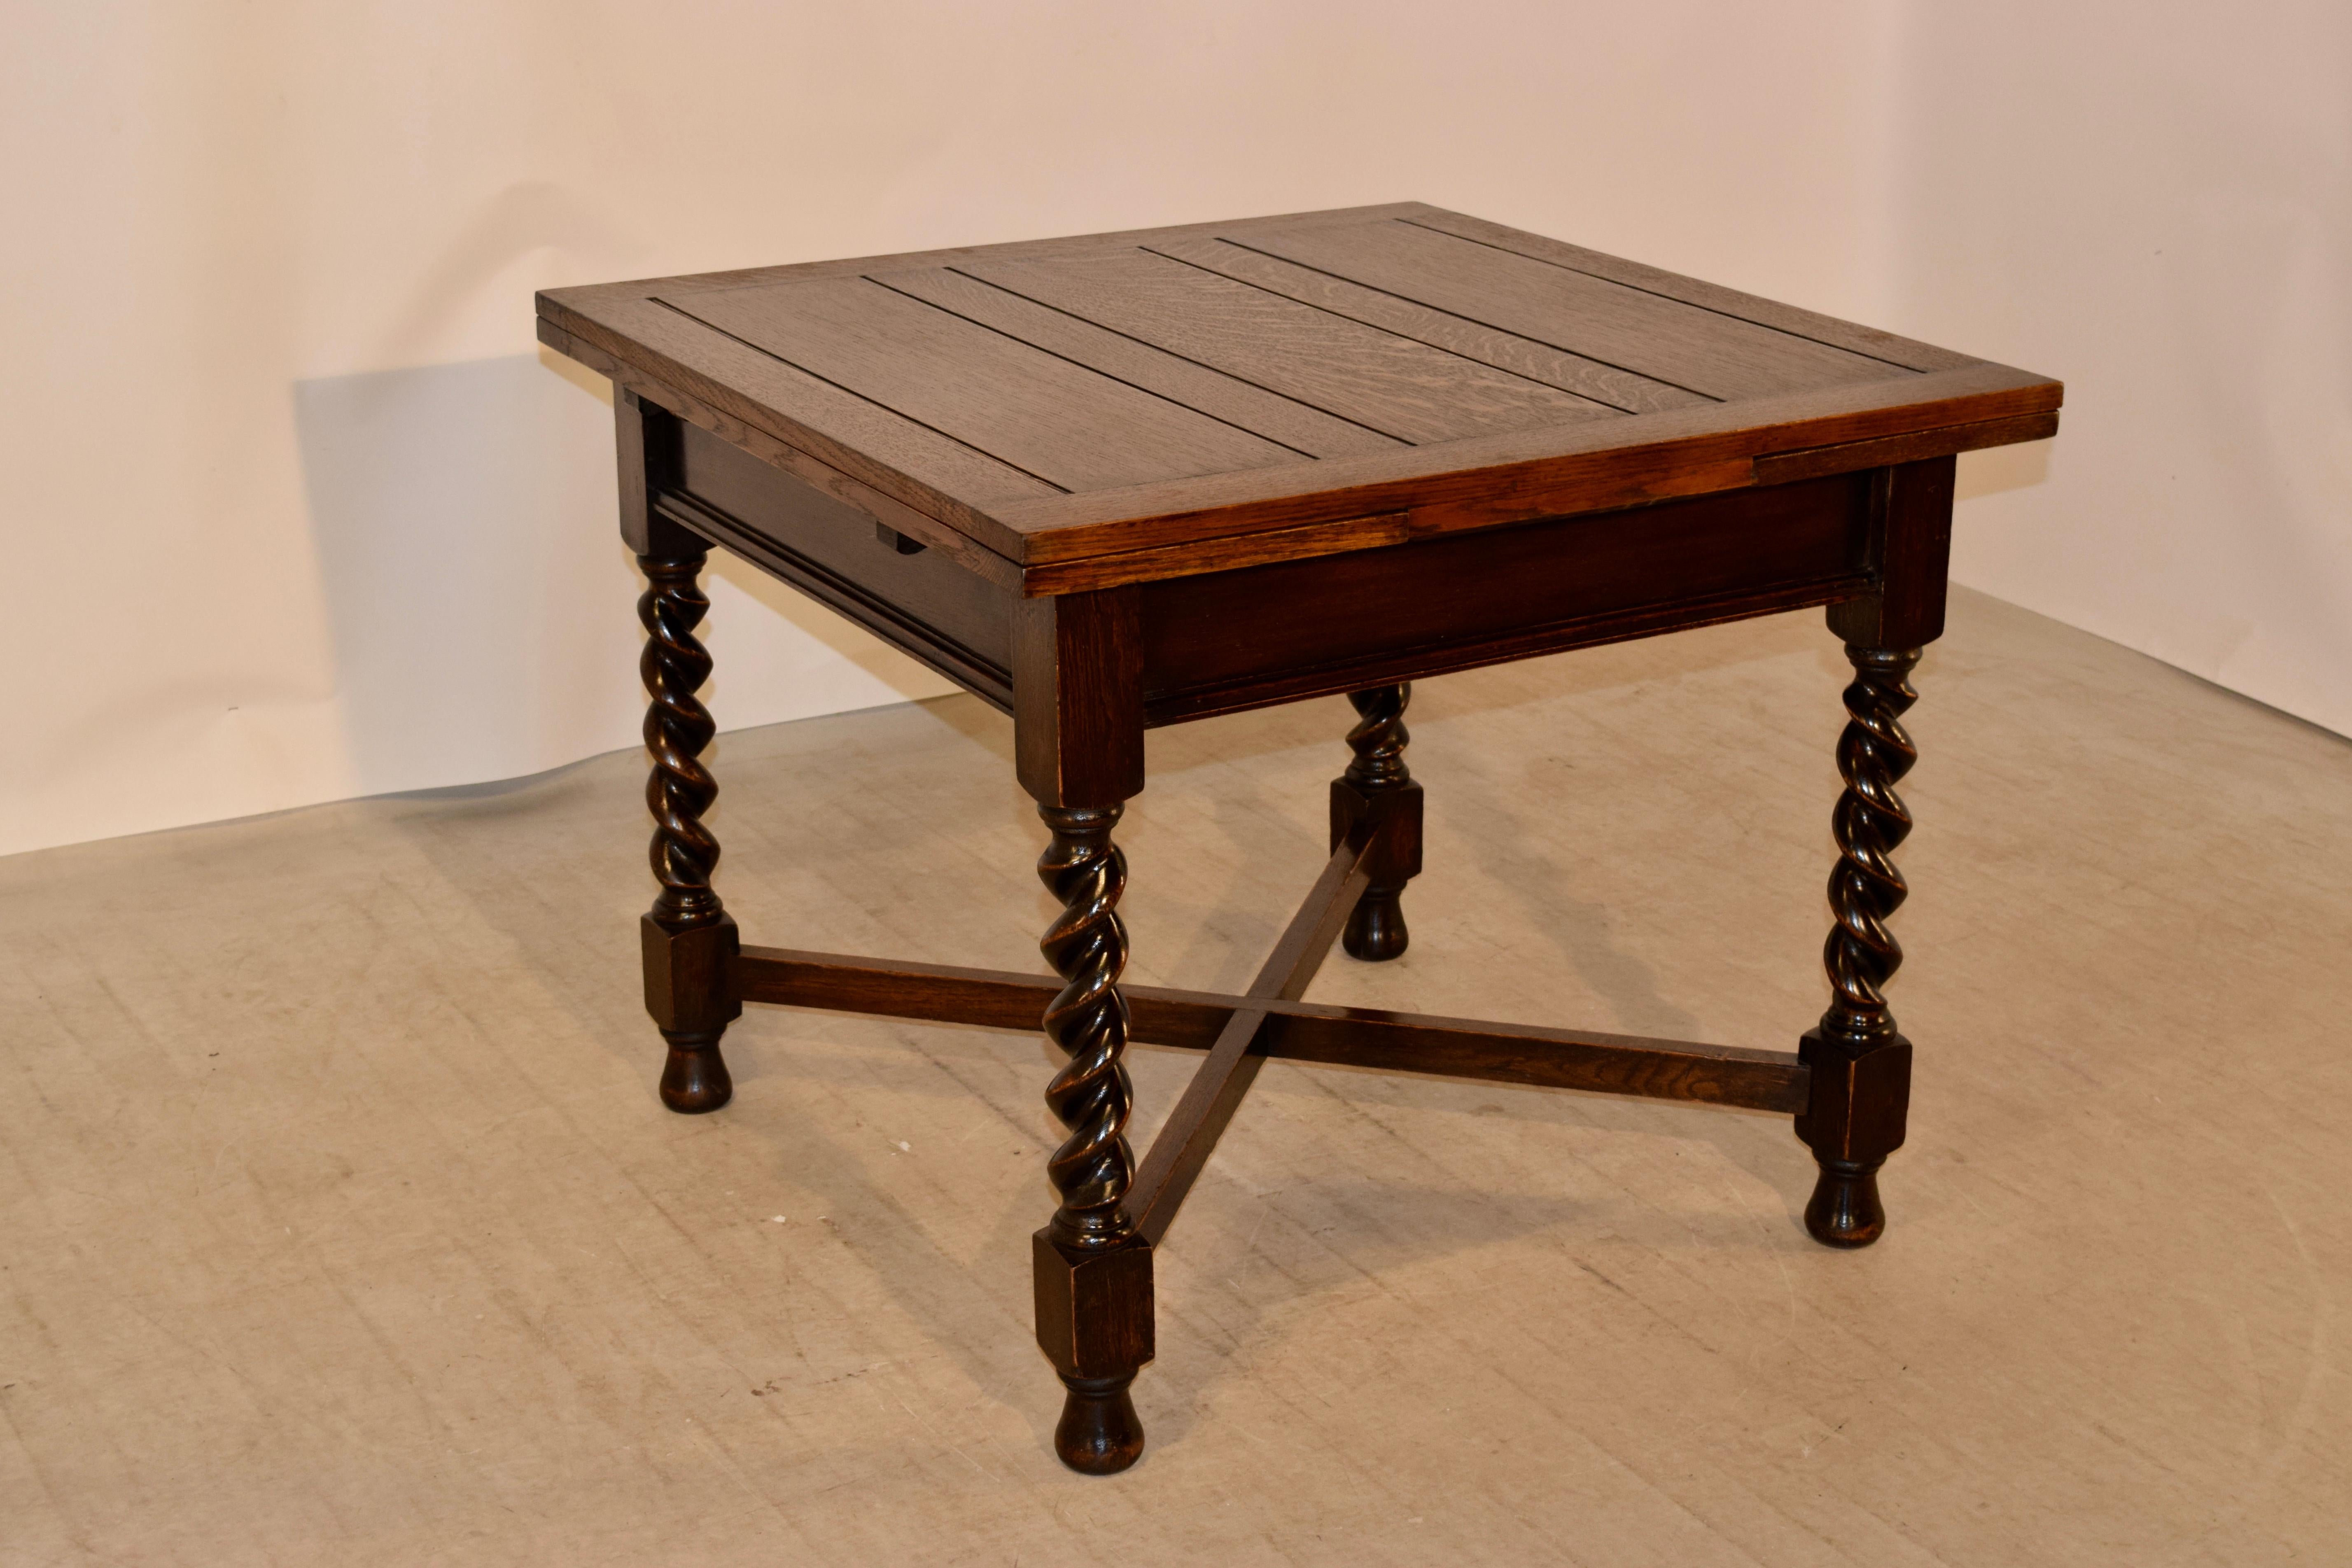 English oak table with draw leaves, circa 1900. The top and leaves are both paneled and follow down to a simple apron with a molded edge and supported on hand-turned barley twist legs joined by cross stretchers and raised on hand-turned feet. The